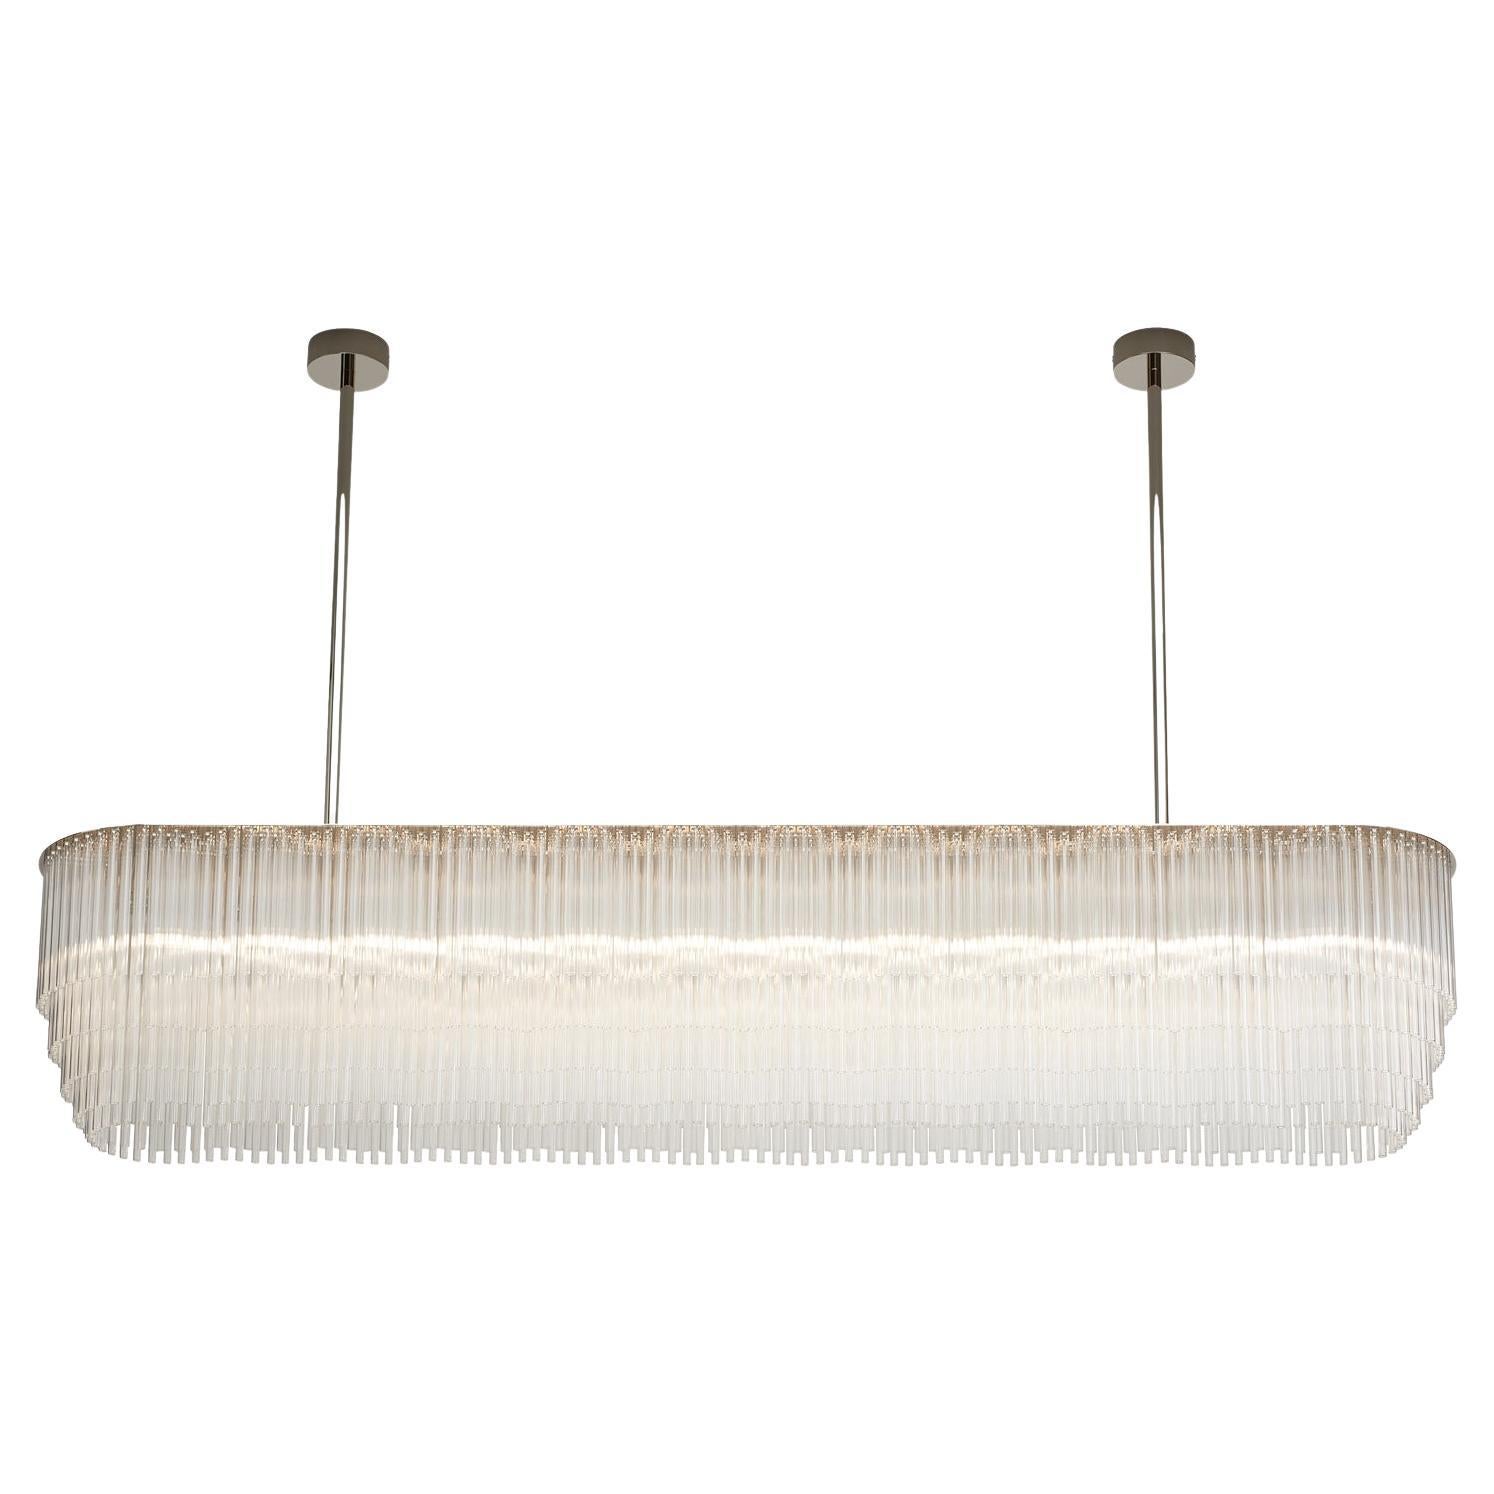 Linear Chandelier 1479mm / 58.25" in Polished Chrome with Tiered Glass Profile For Sale